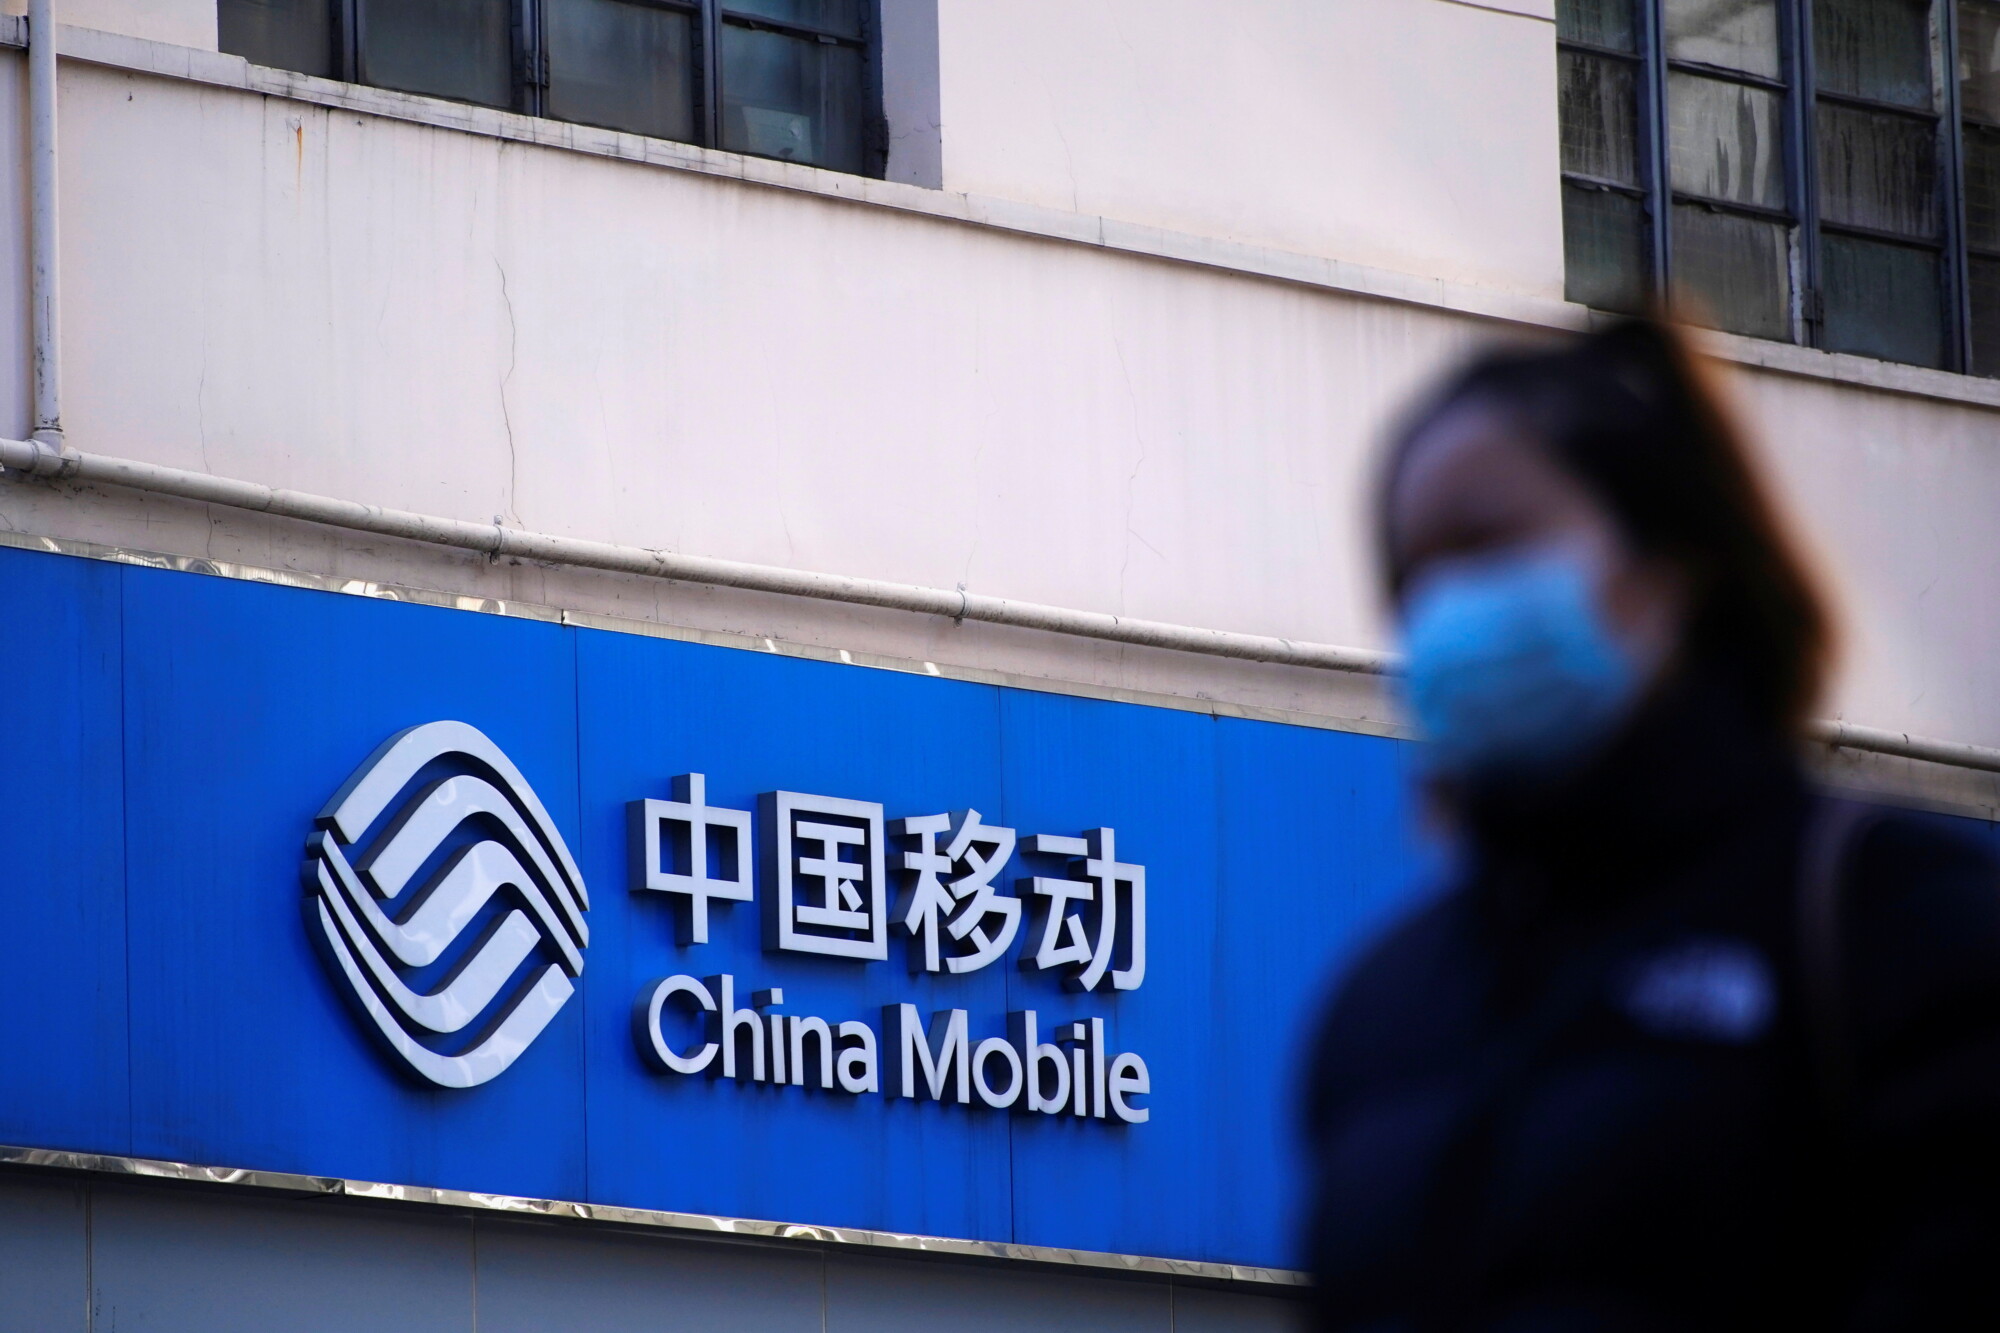 NY Stock Exchange to Delist 3 Chinese Telecom Carriers